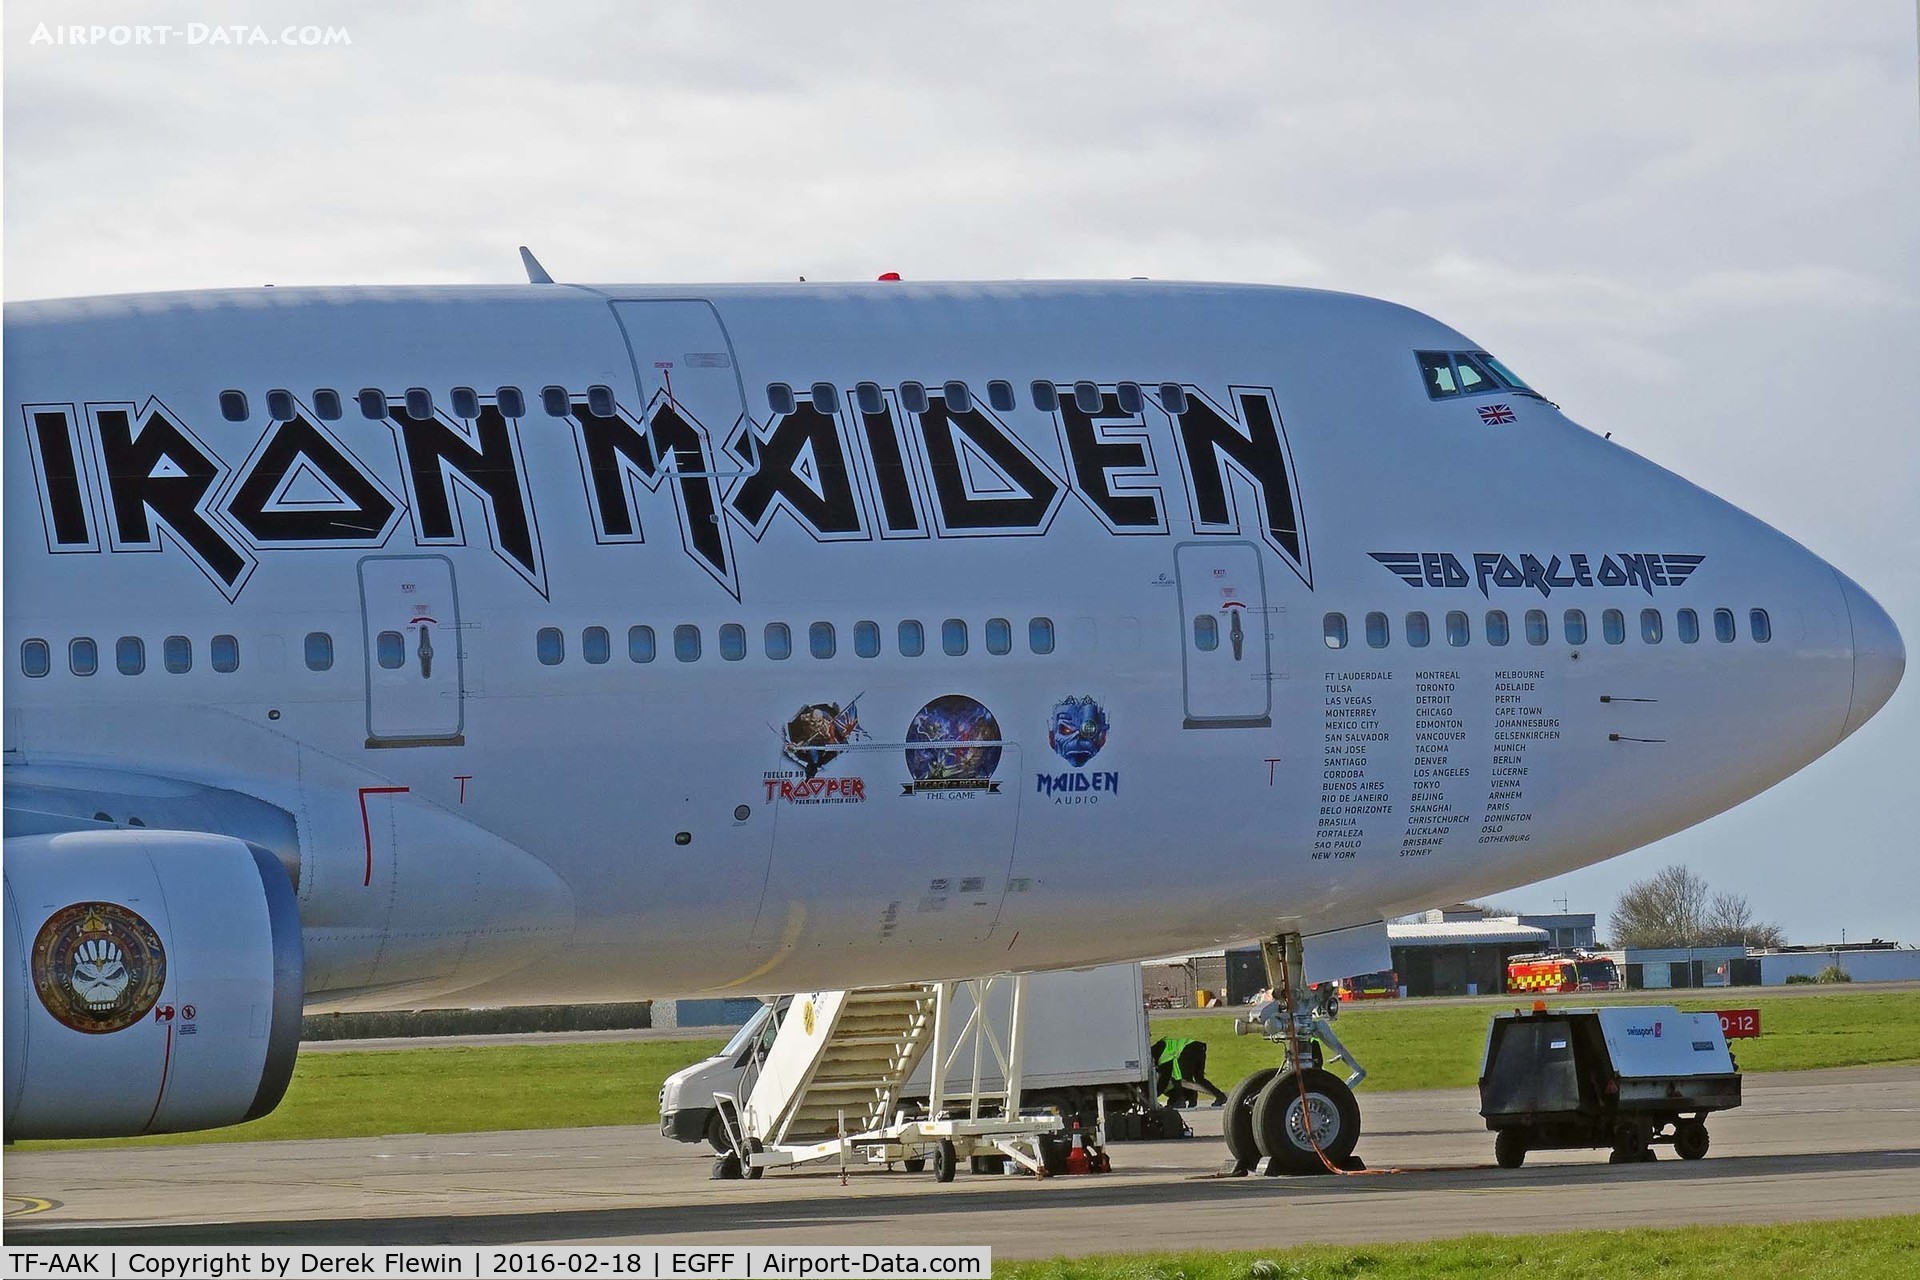 TF-AAK, 2003 Boeing 747-428 C/N 32868, 747-428, Air Atlanta Icelandic, Iron Maiden's Ed Force One, previously F-GITH, nose art.